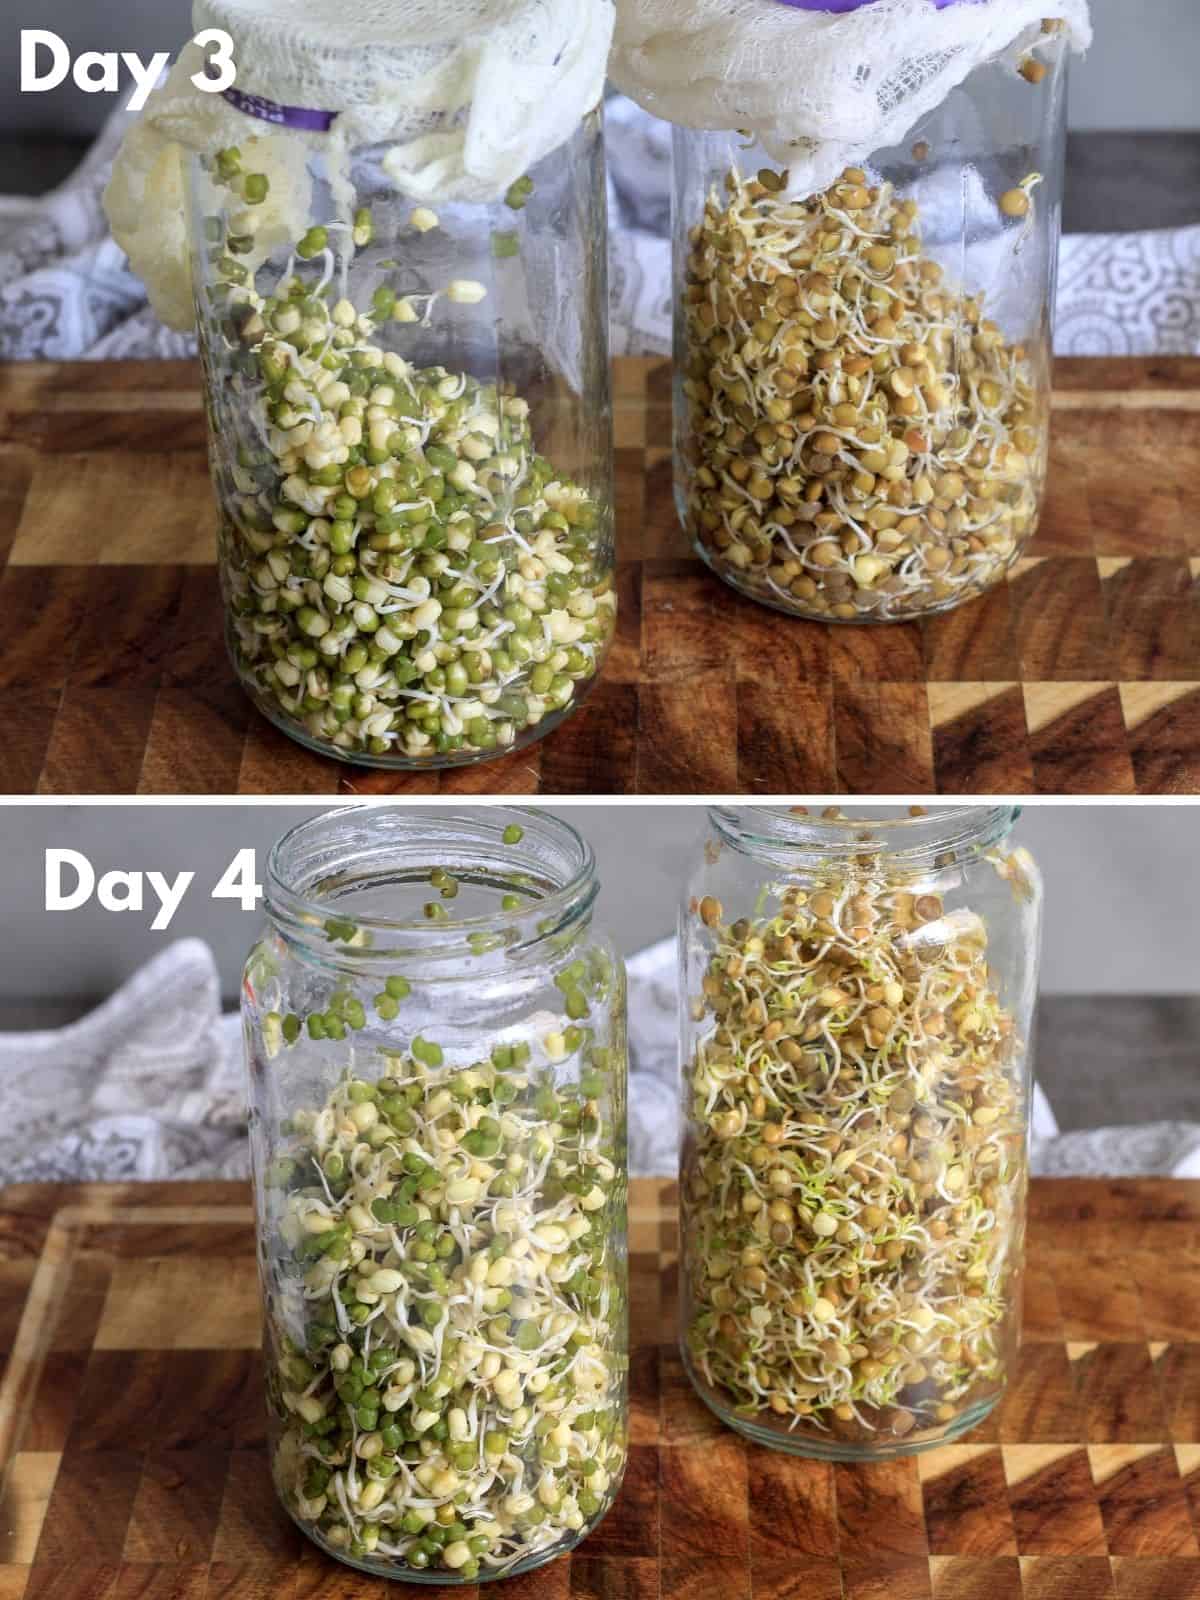 Sprouts in jars on day 3 an day 4